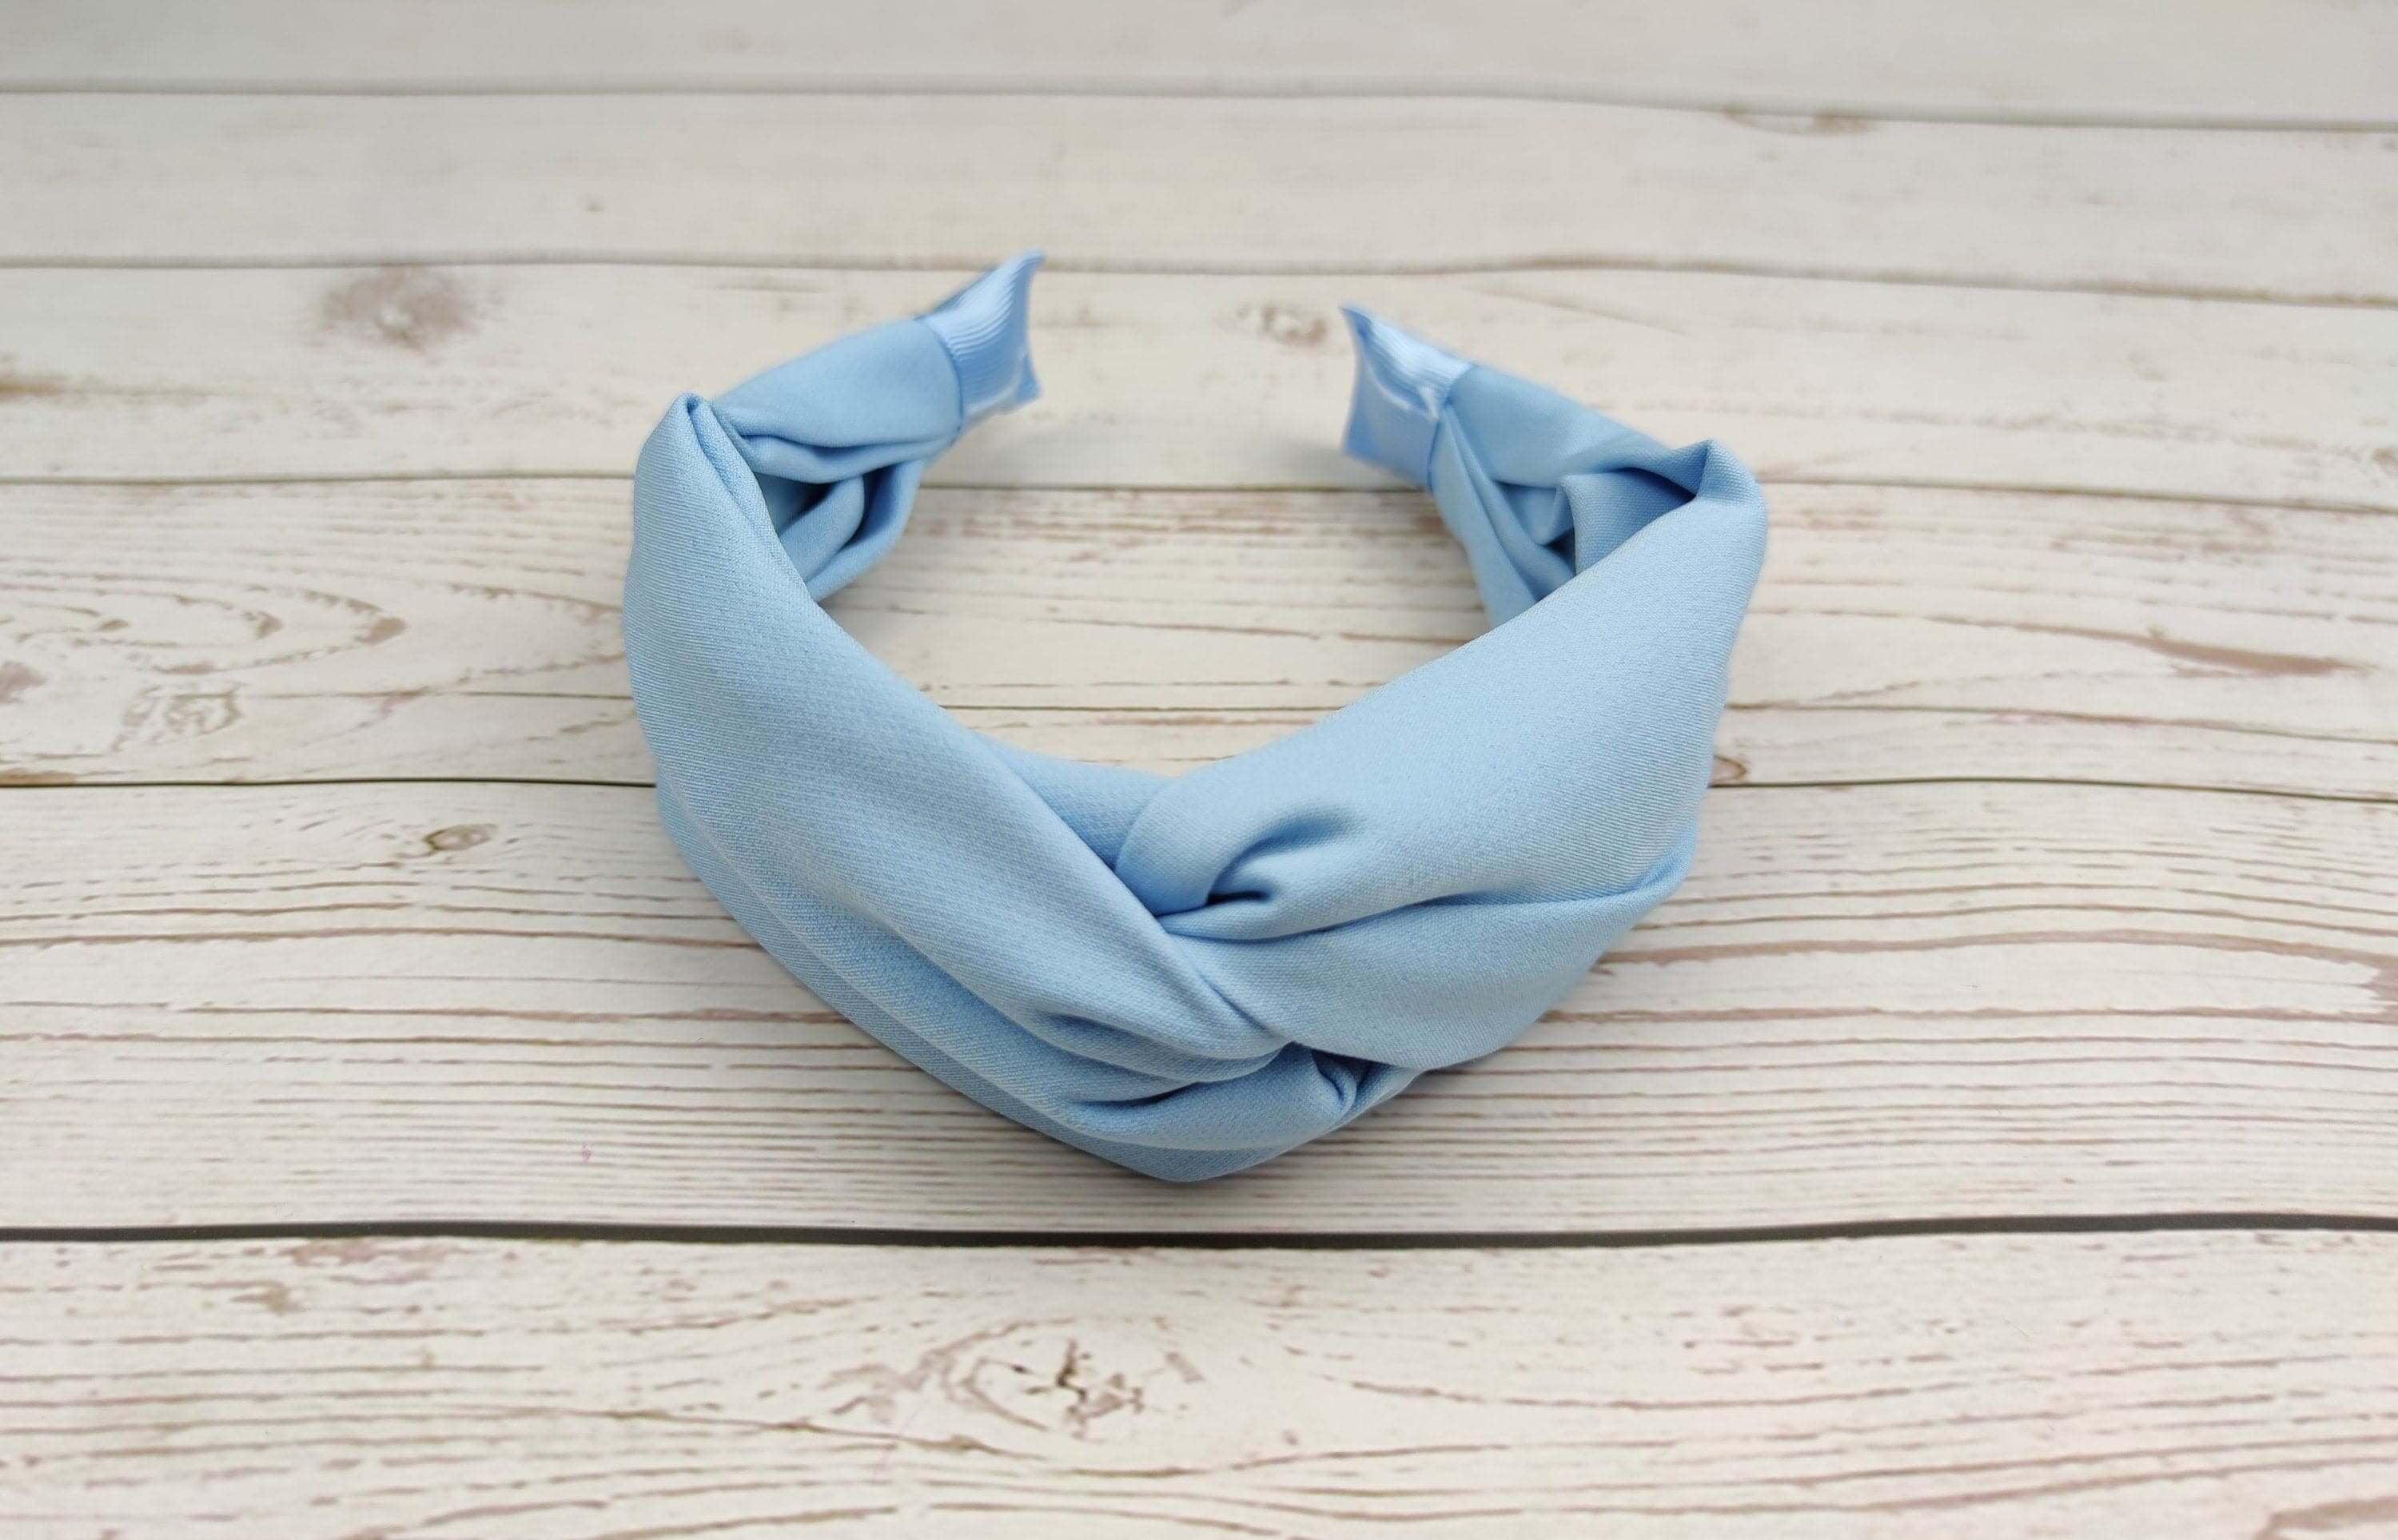 Beautiful Baby Blue Twist Knot Headband - Women's Classic and Fashionable Light Blue Hairband made of Viscose Crepe available at Moyoni Design